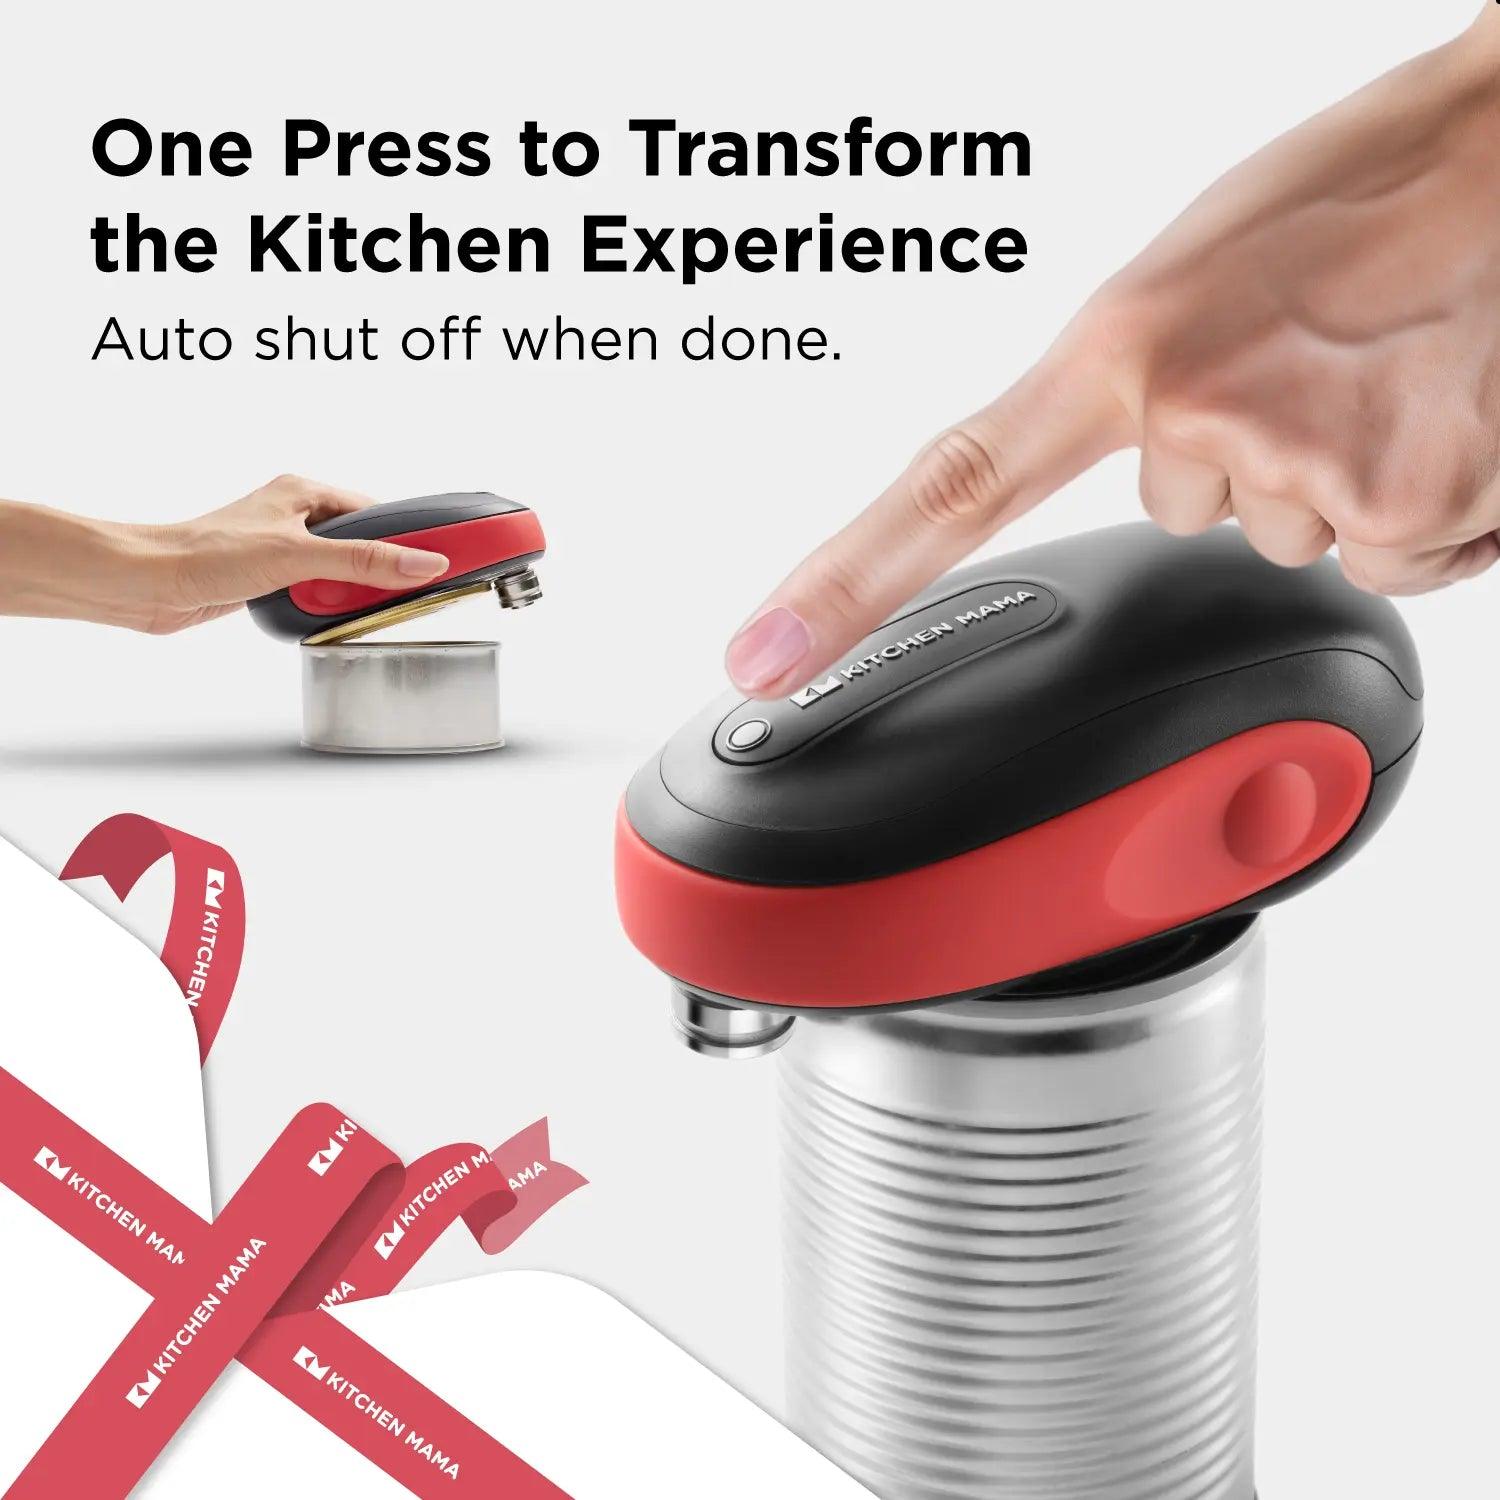 Kitchen Mama Automatic Can Opener How to Use 